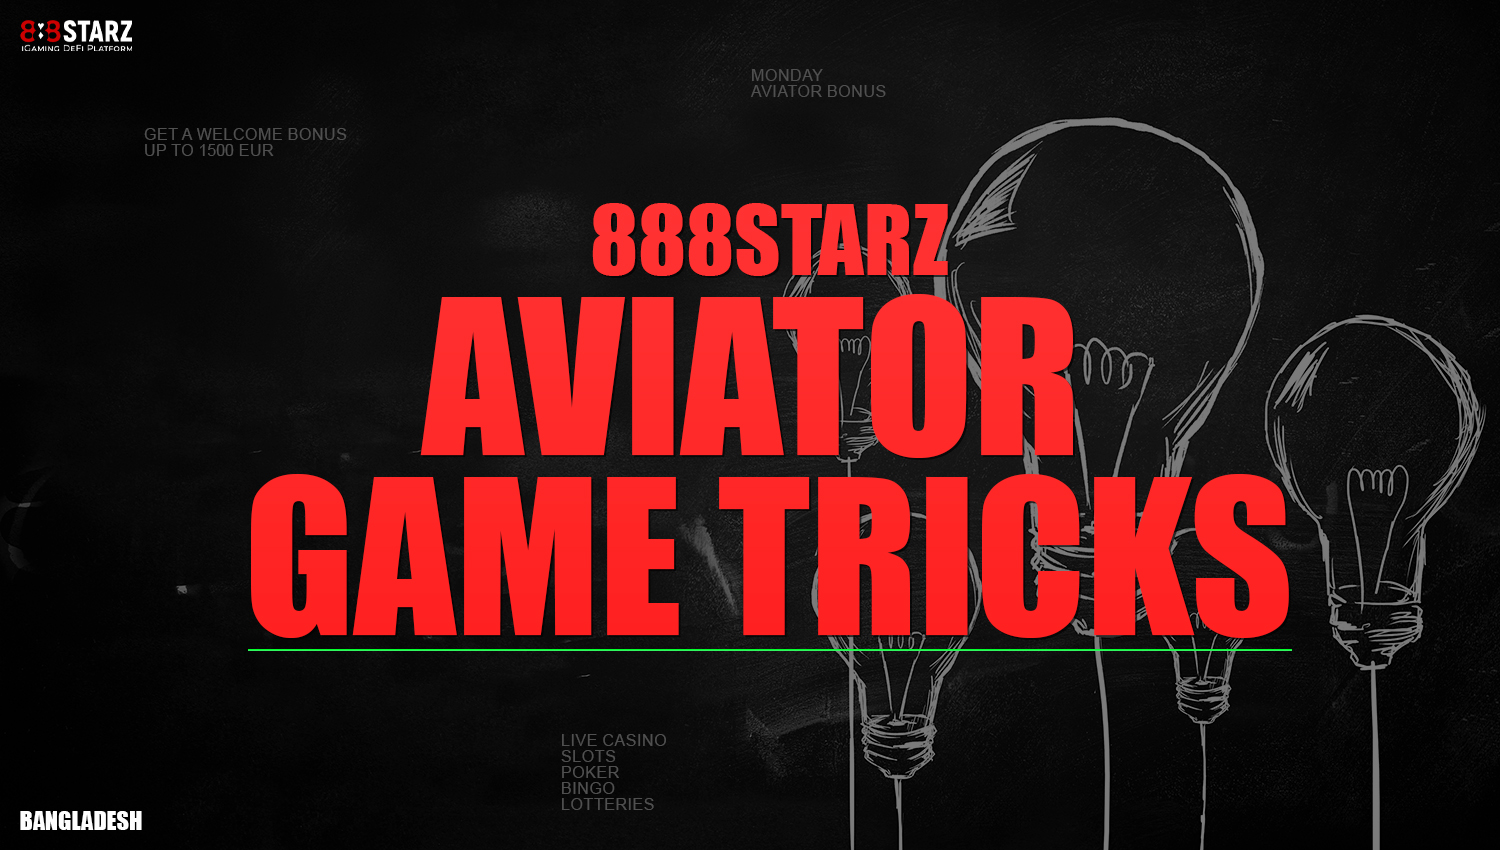 Useful tips for successful Aviator game at 888starz